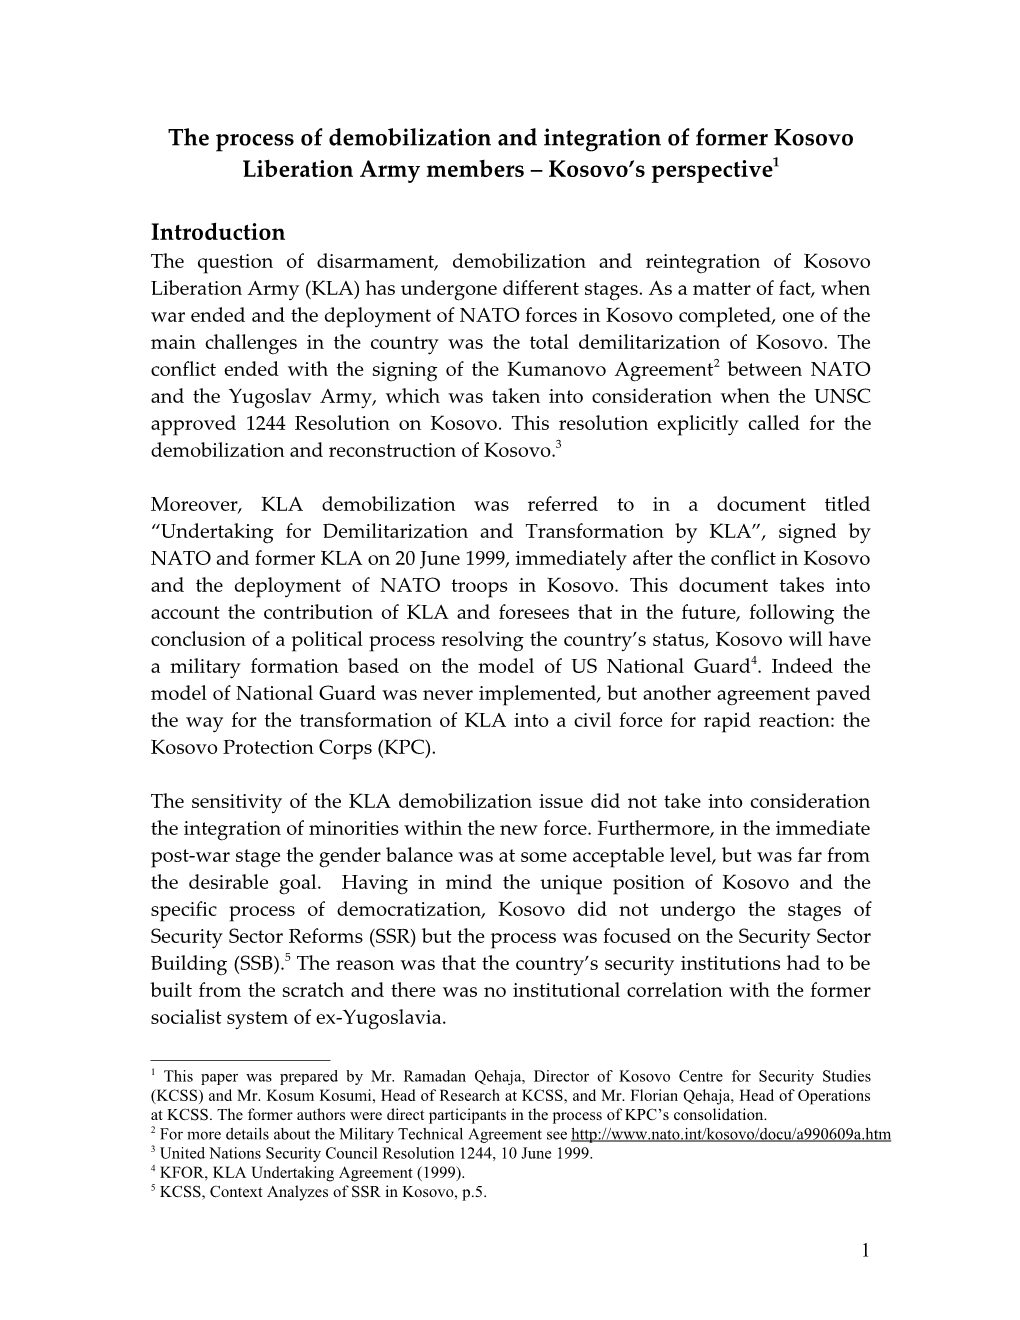 The Process of Demobilization and Integration of Former Kosovo Liberation Army Members – Kosovo’S Perspective1